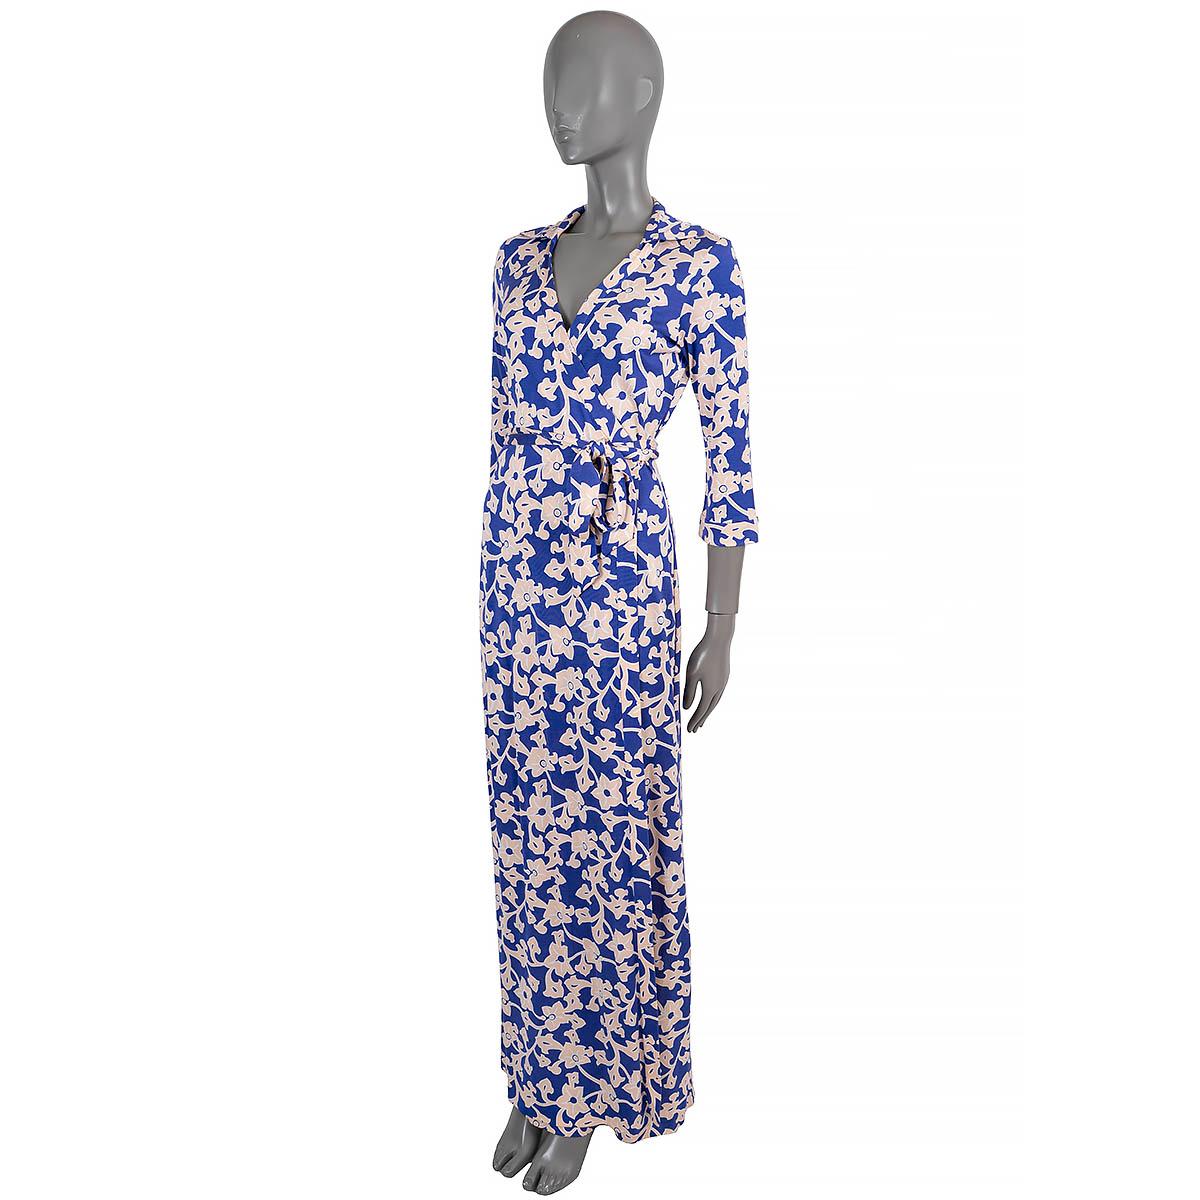 100% authentic Diane von Furstenberg Abigail floral maxi wrap dress in blue, pink and white silk (100%). Features 3/4 sleeves. Unlined. Has been worn and is in excellent condition.

Measurements
Tag Size	8
Size	M
Shoulder Width	43cm (16.8in)
Bust